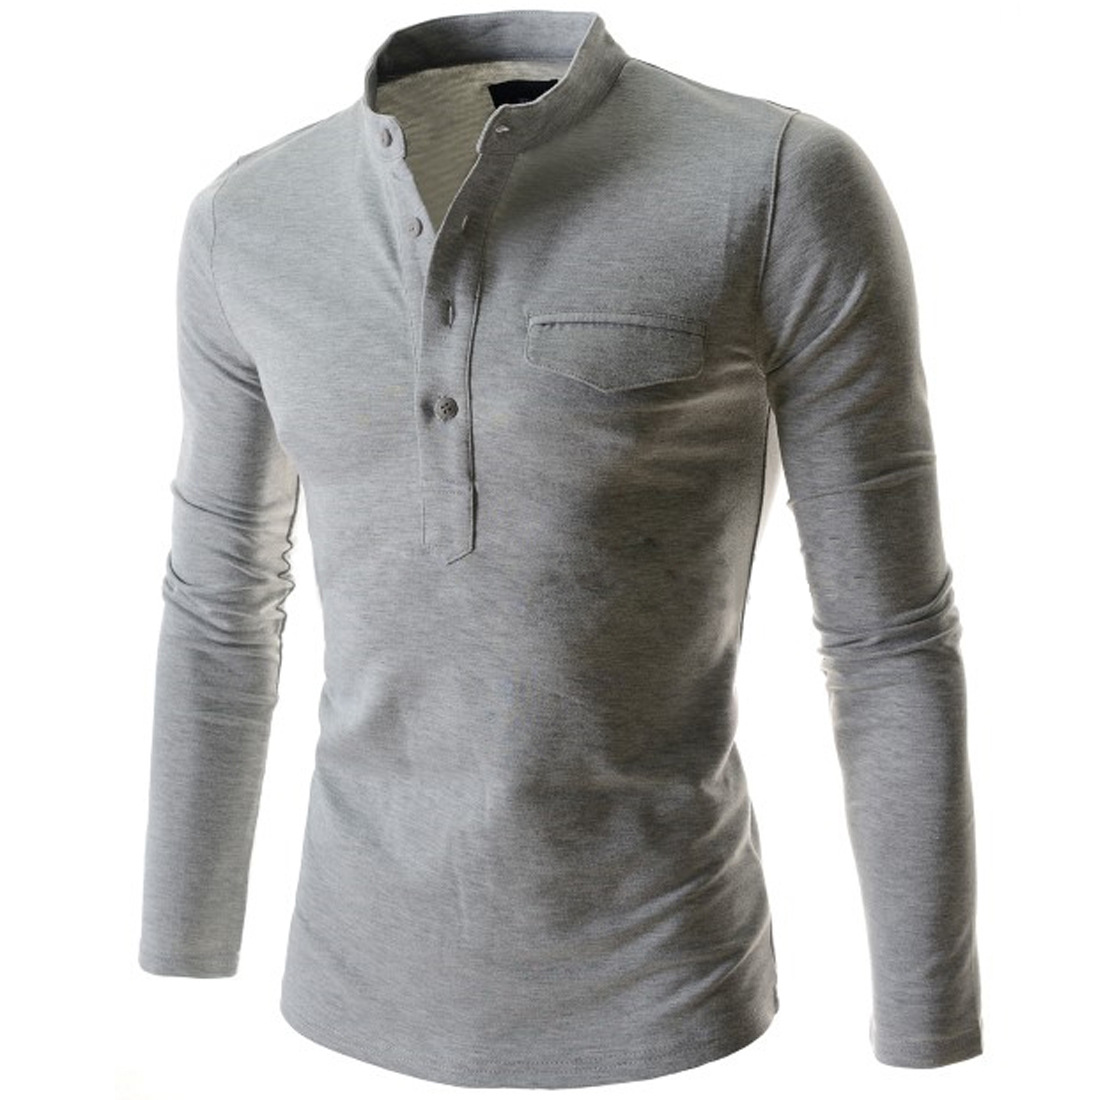 Men's solid color long sleeve stand collar base shirt